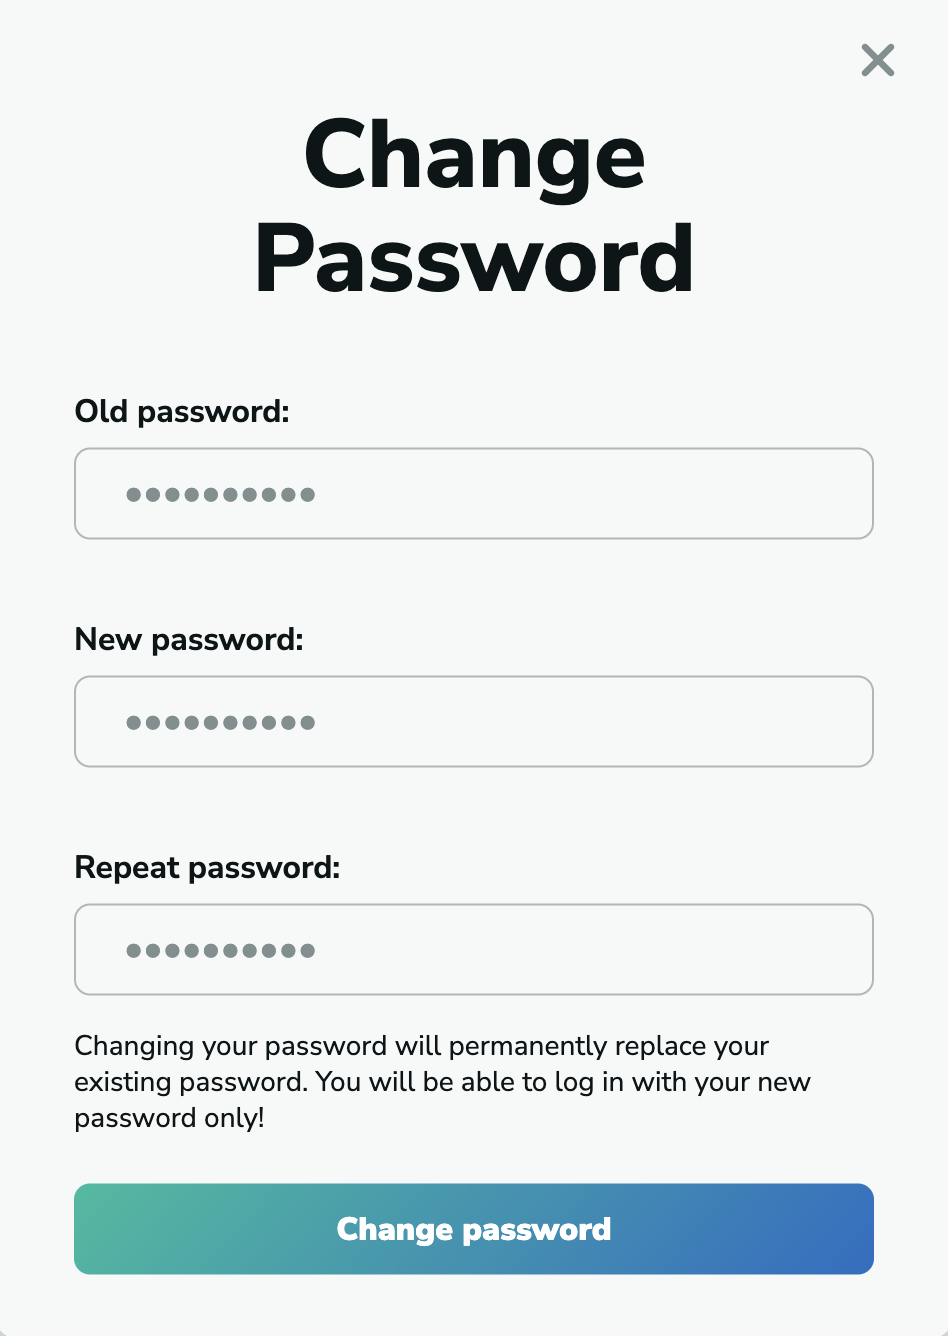 Enter old and new passwords in MillionVerifier